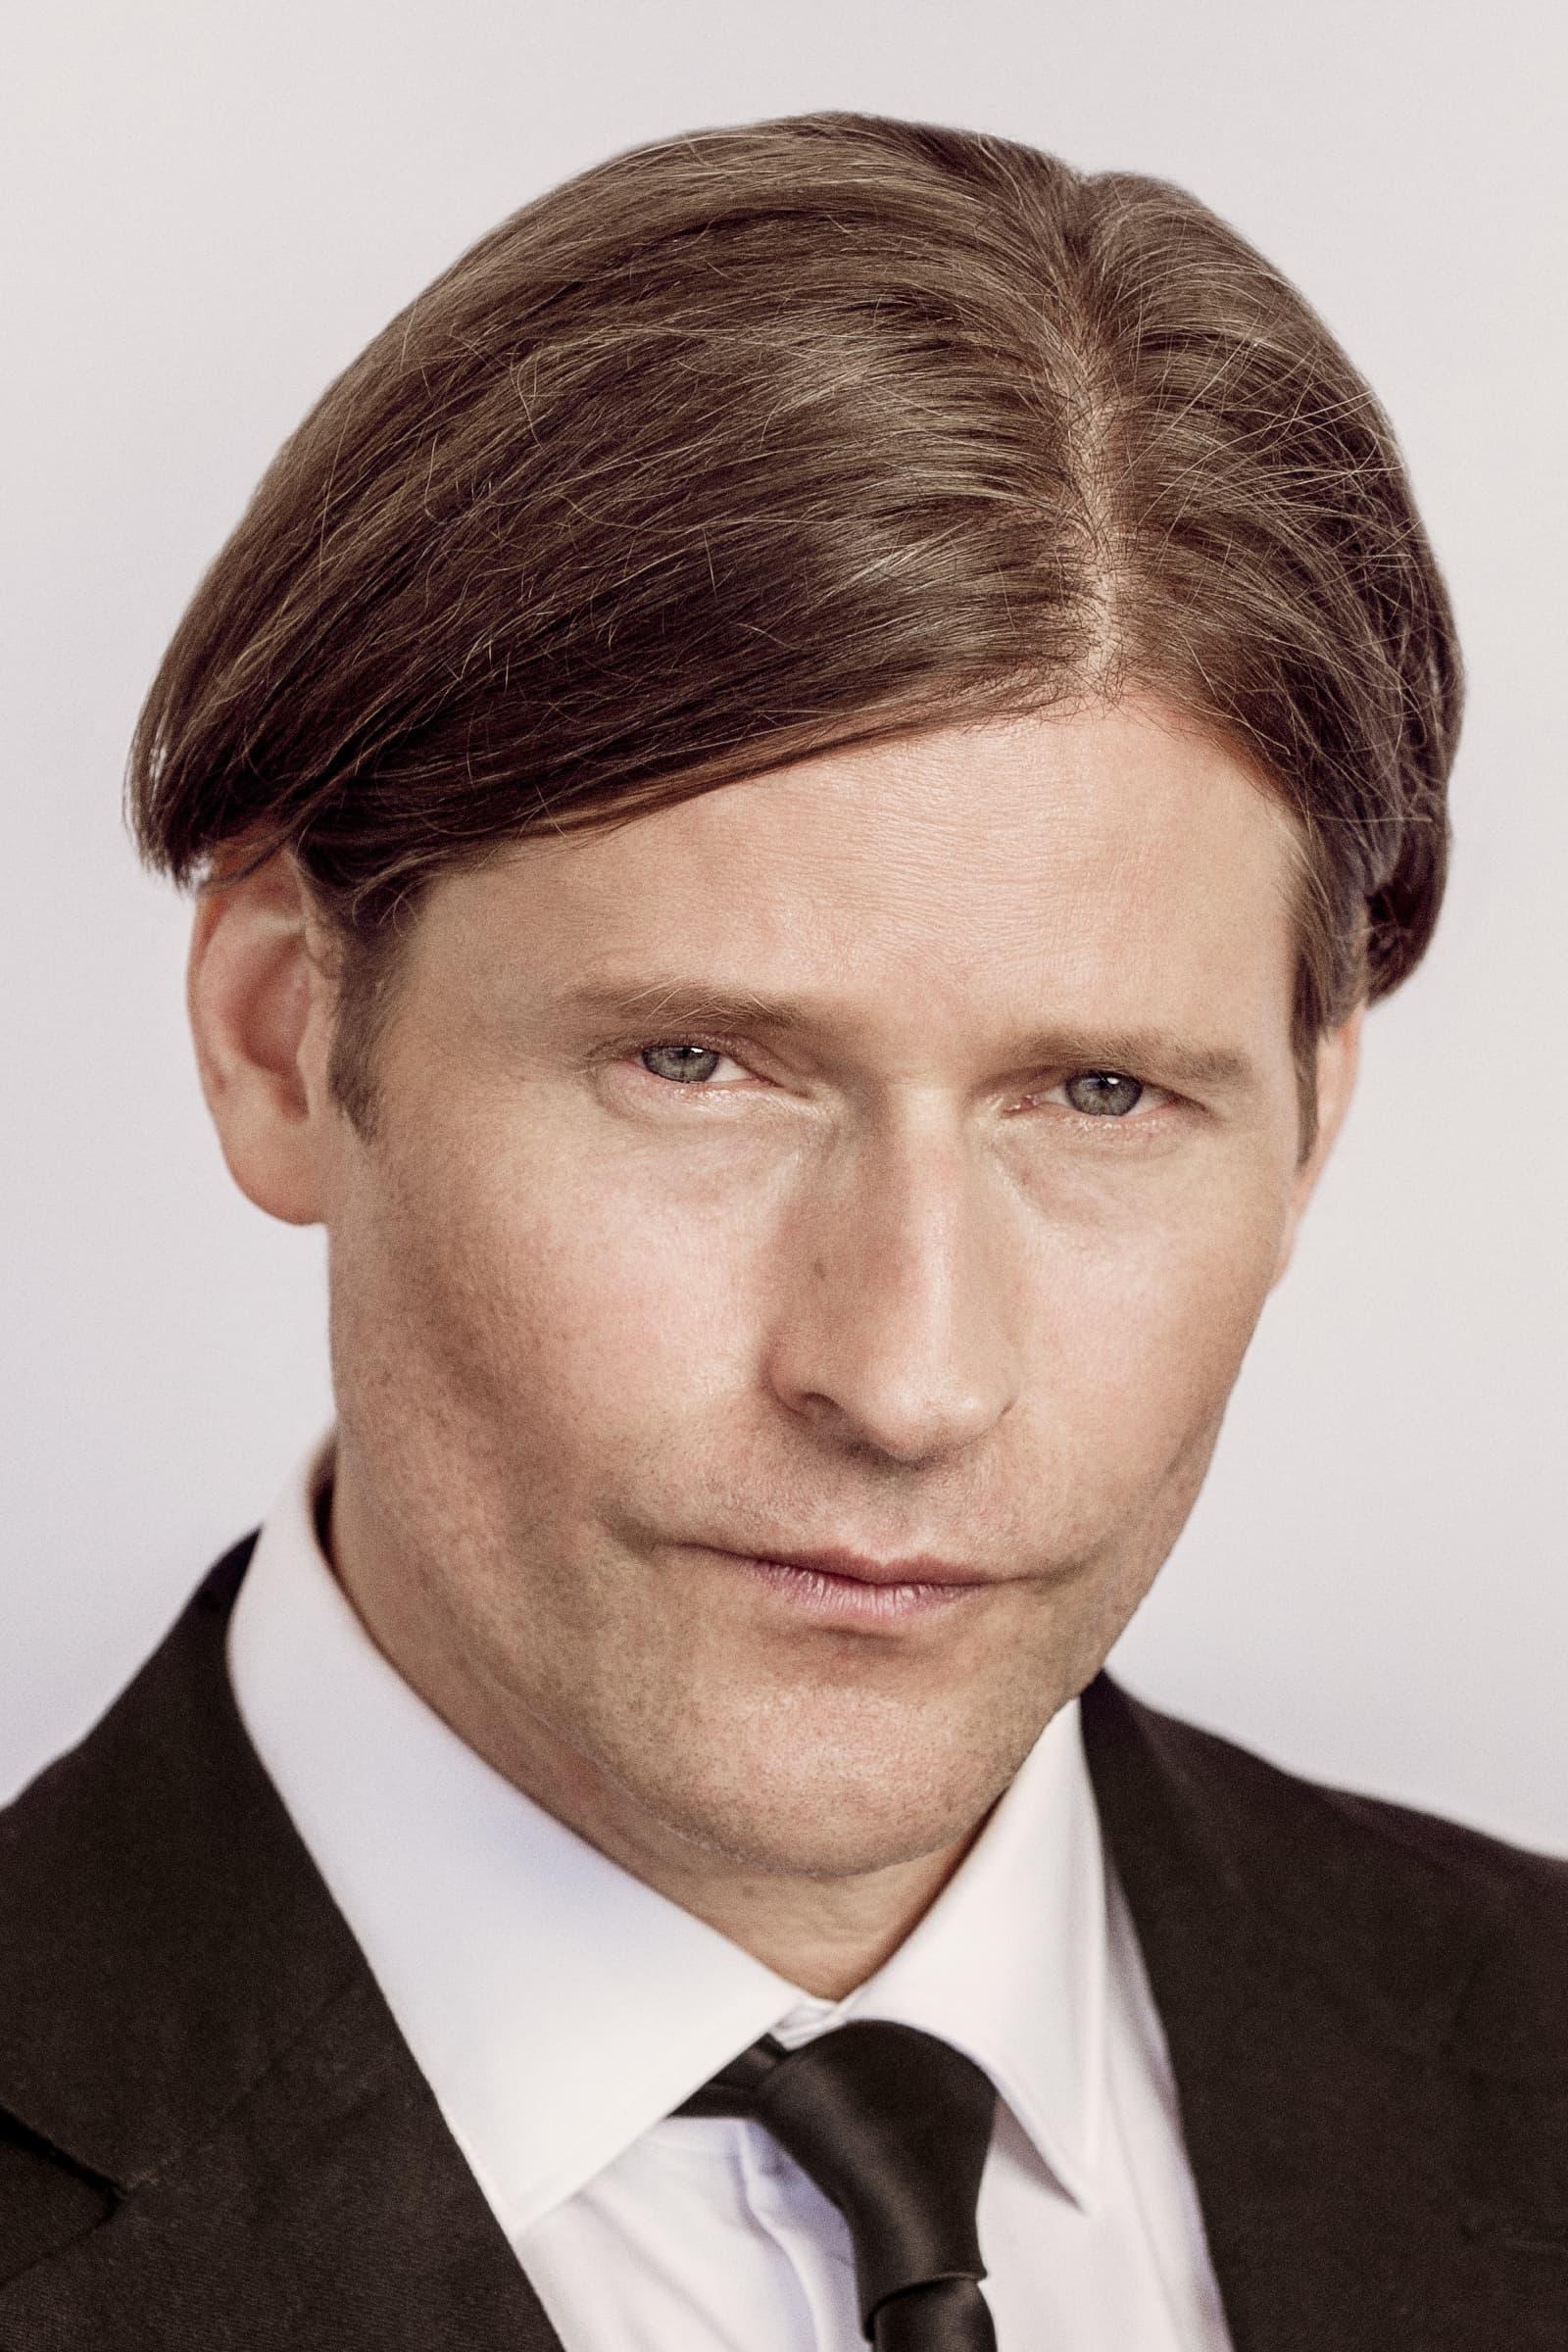 Crispin Glover | George McFly (archive footage) (uncredited)